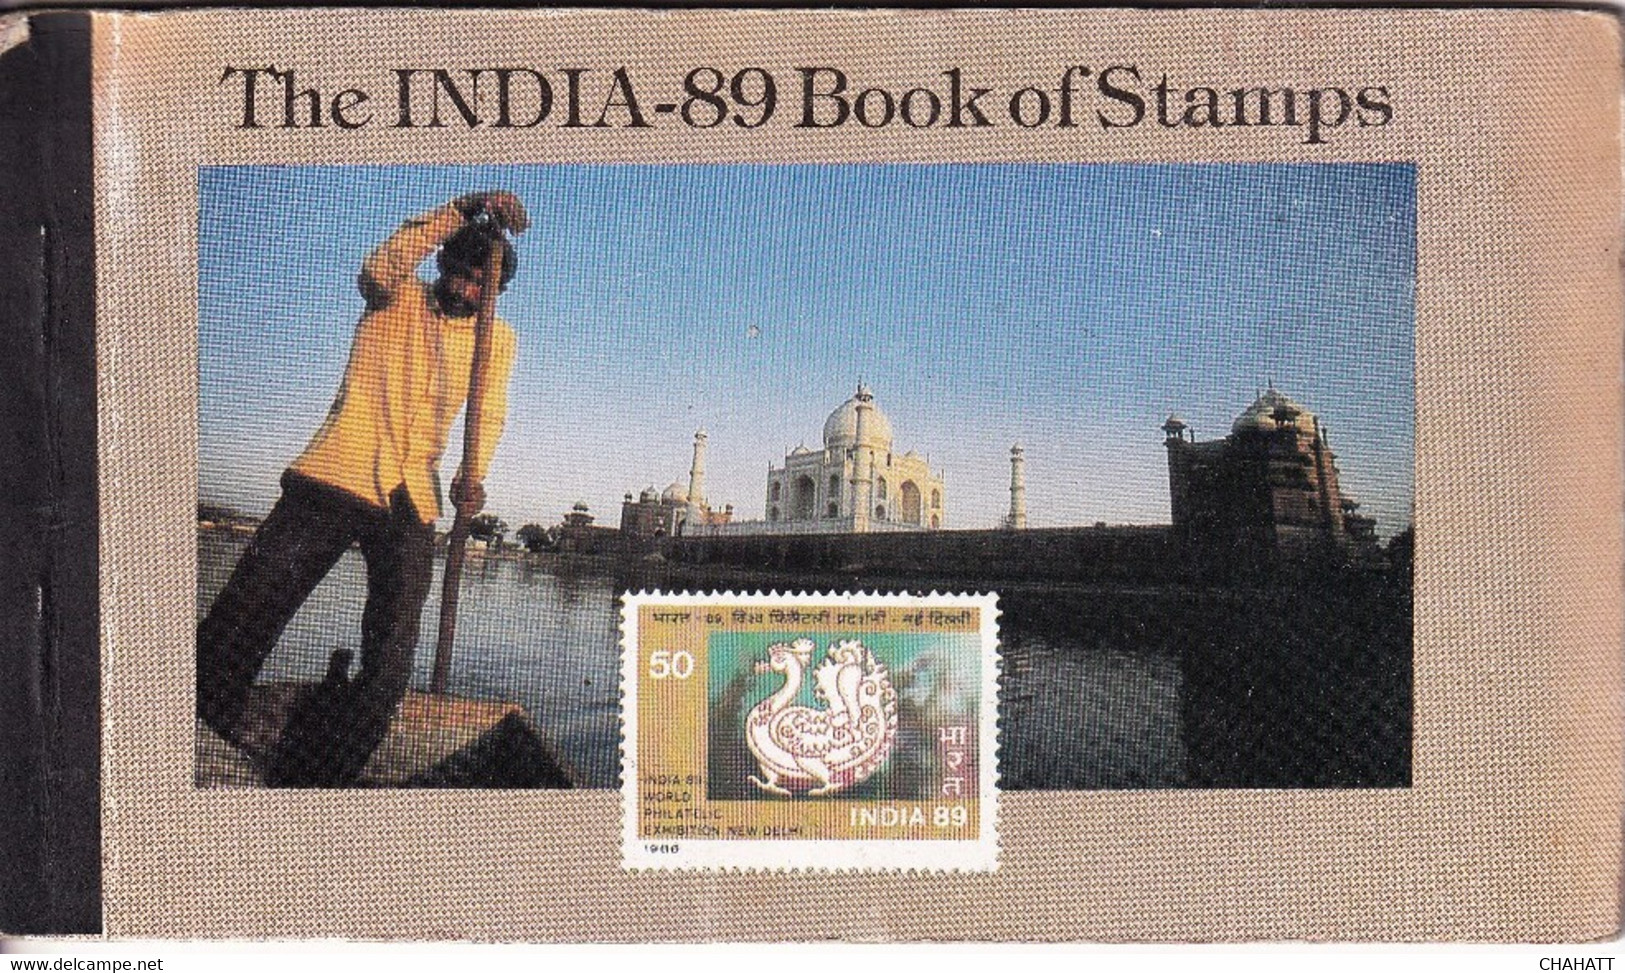 INDIA -89- BOOK OF STAMPS- UNEXPLODED-COMPLETE WITH SHEETLETS- REPRINTED STAMPS-MNH-SCARCE-BX2-38 - Lots & Serien